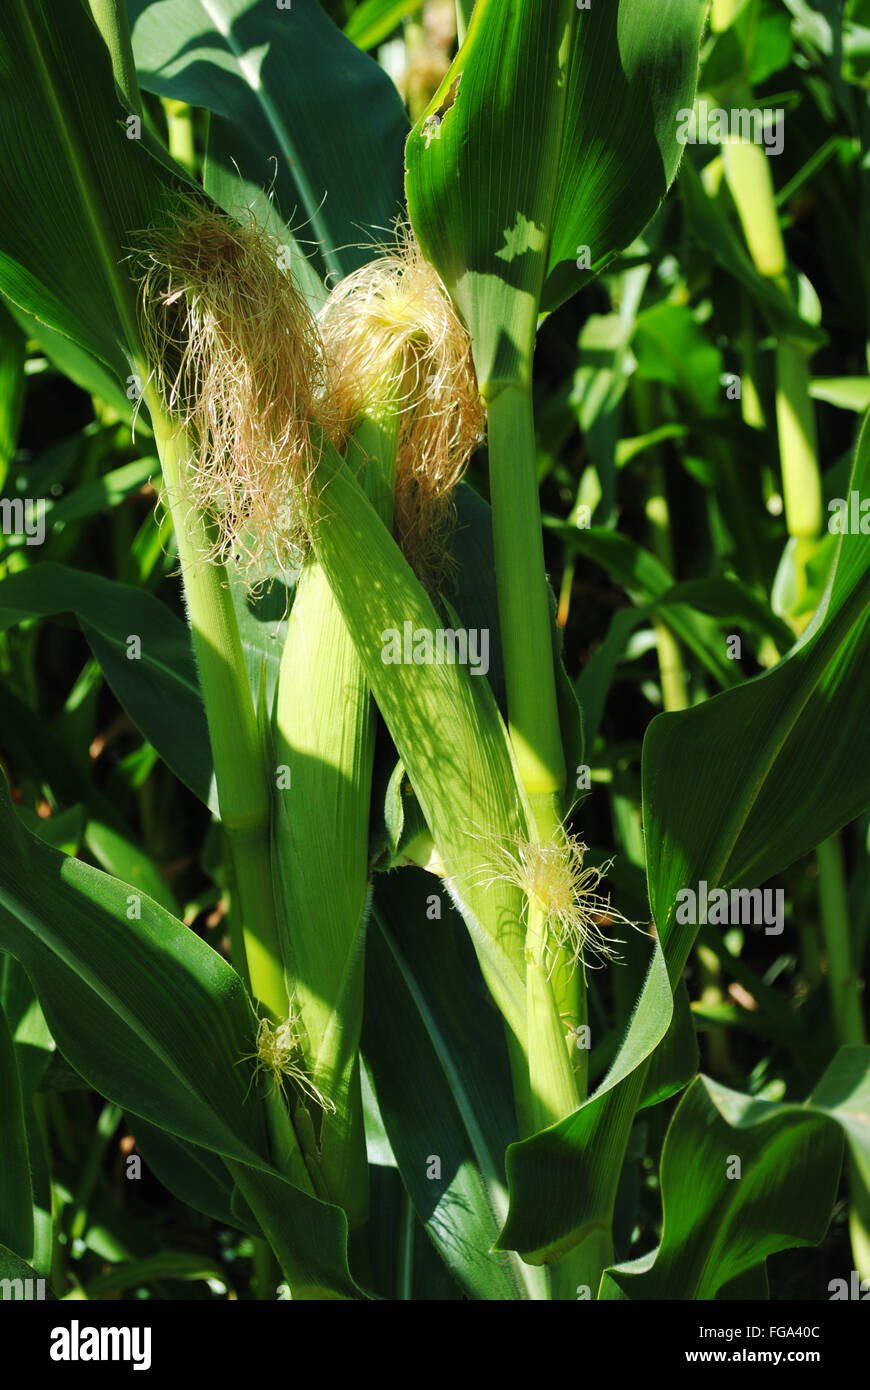 Two Corn Cobs Growing in a Cornfield Stock Photo